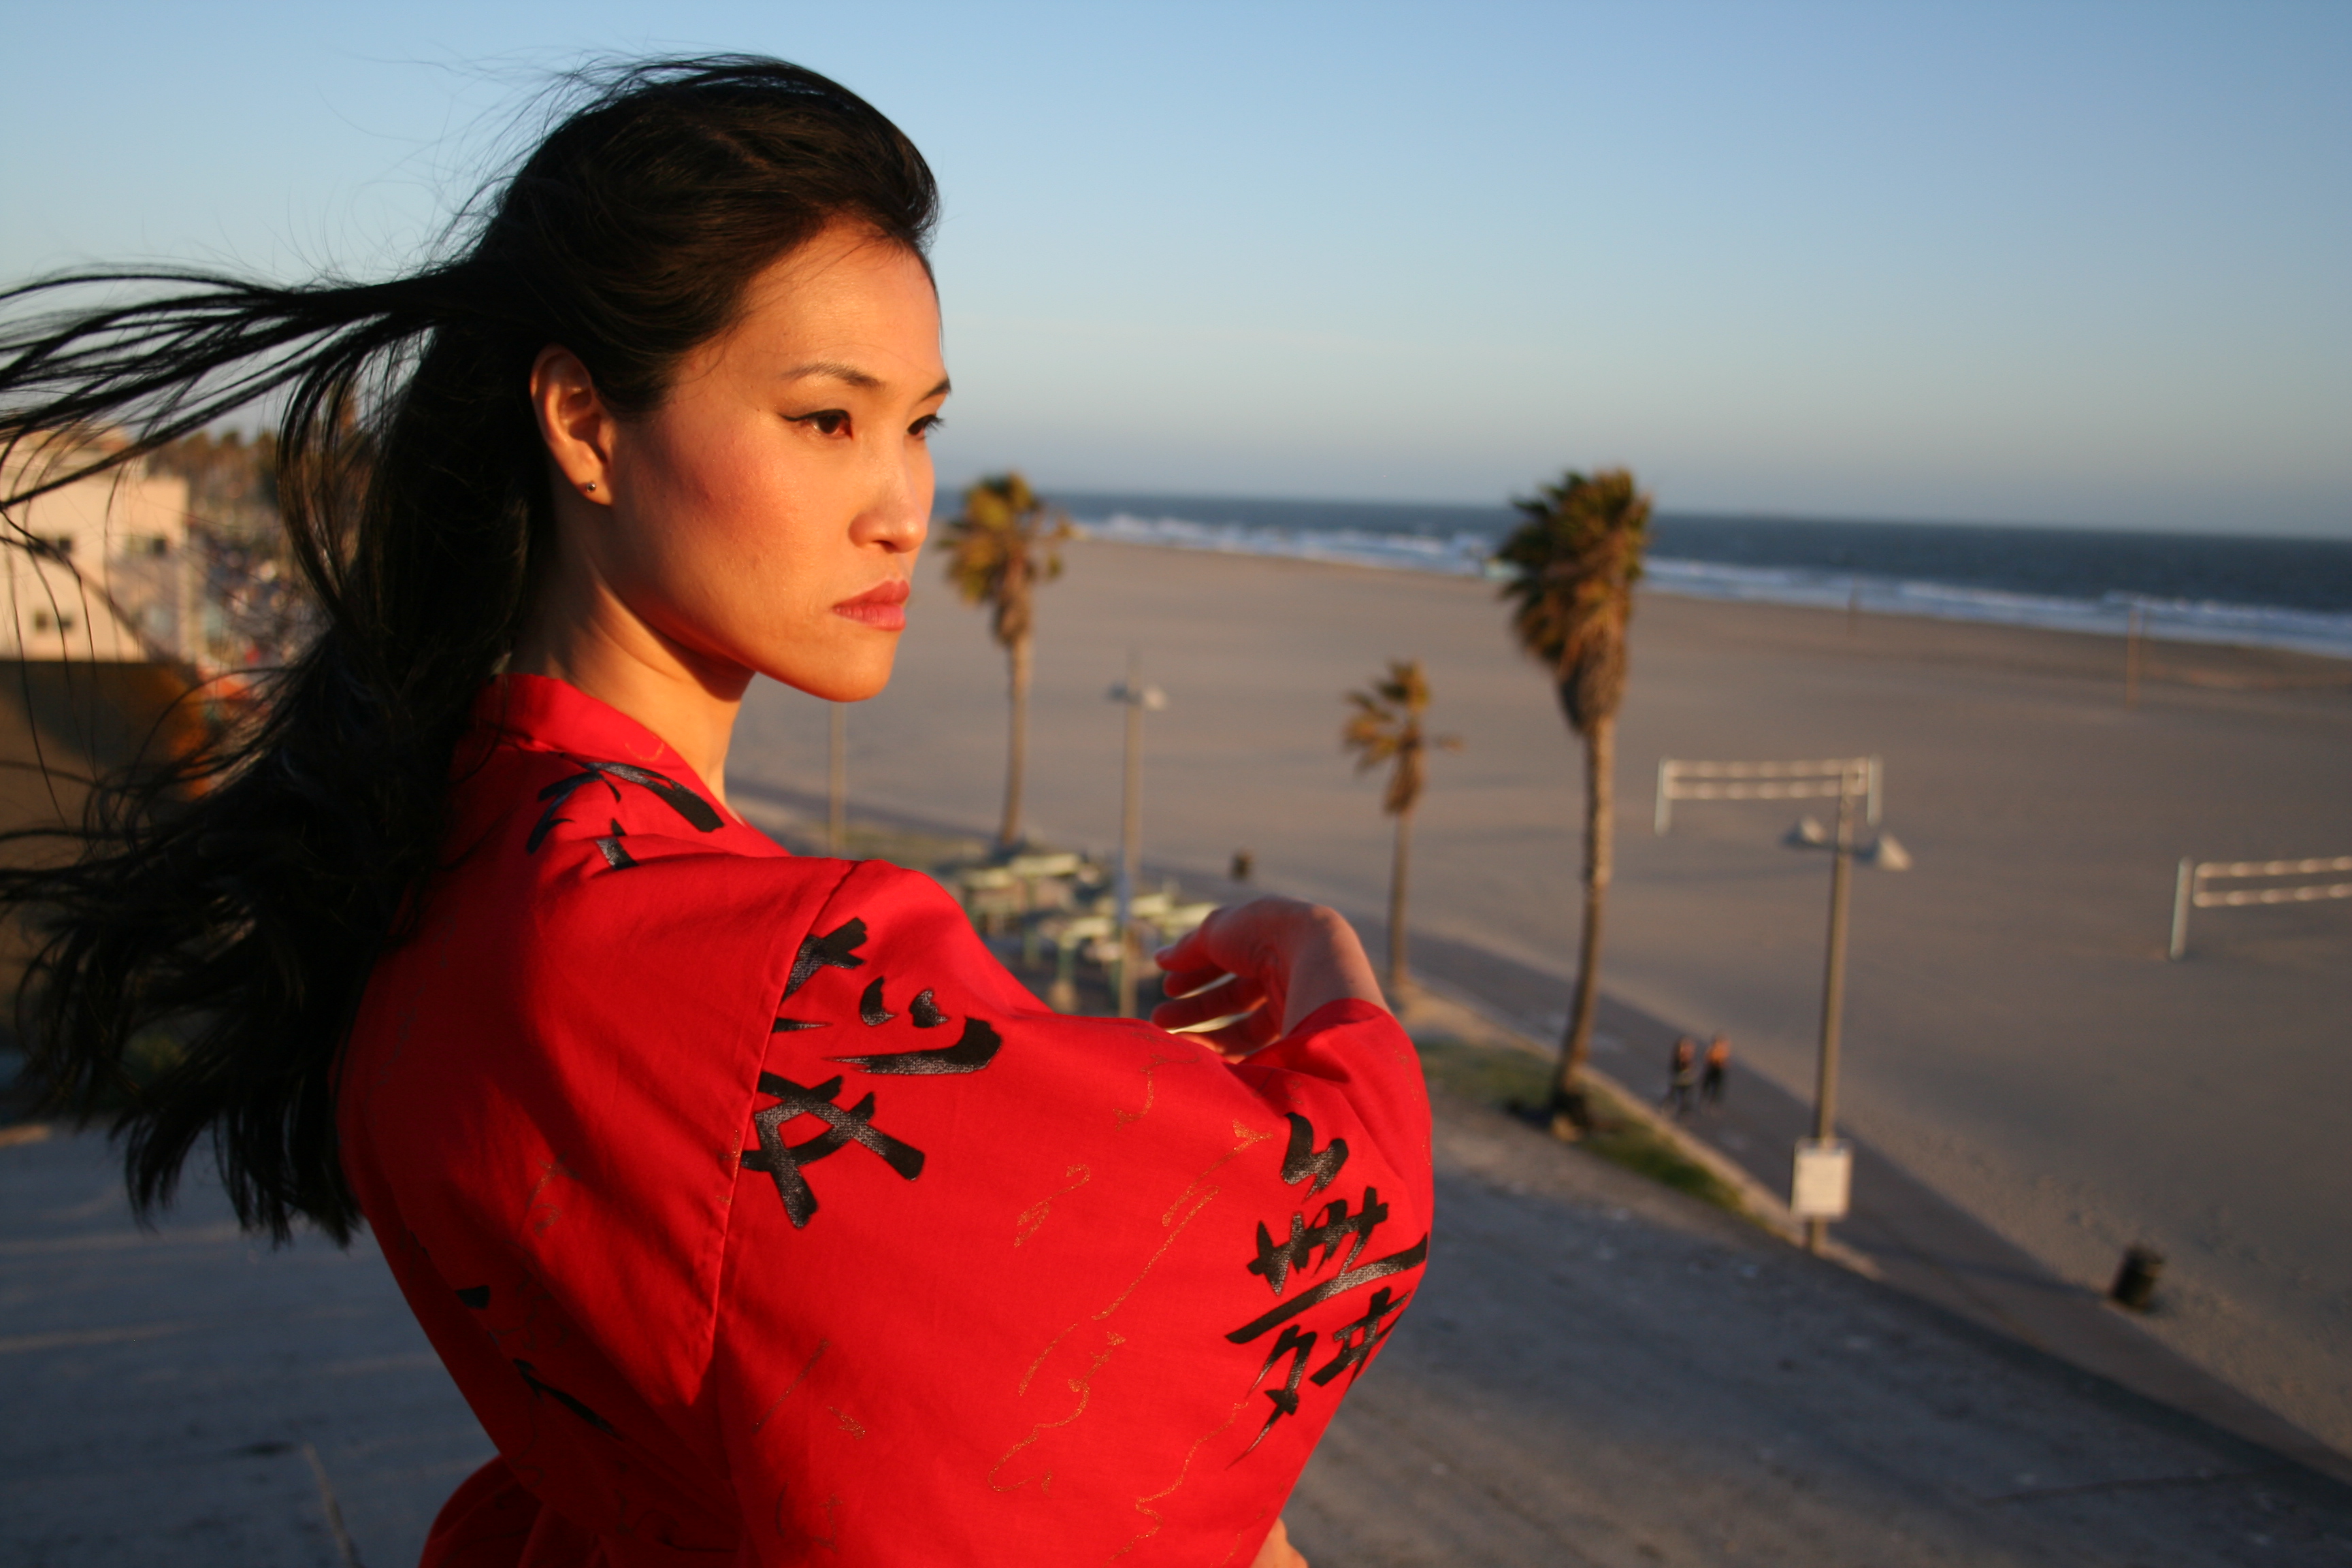 Hollywood Sunset on Venice Beach Protagonist High Priestess Actress Lai Peng Chan for Engraved TV series Venice Beach LA